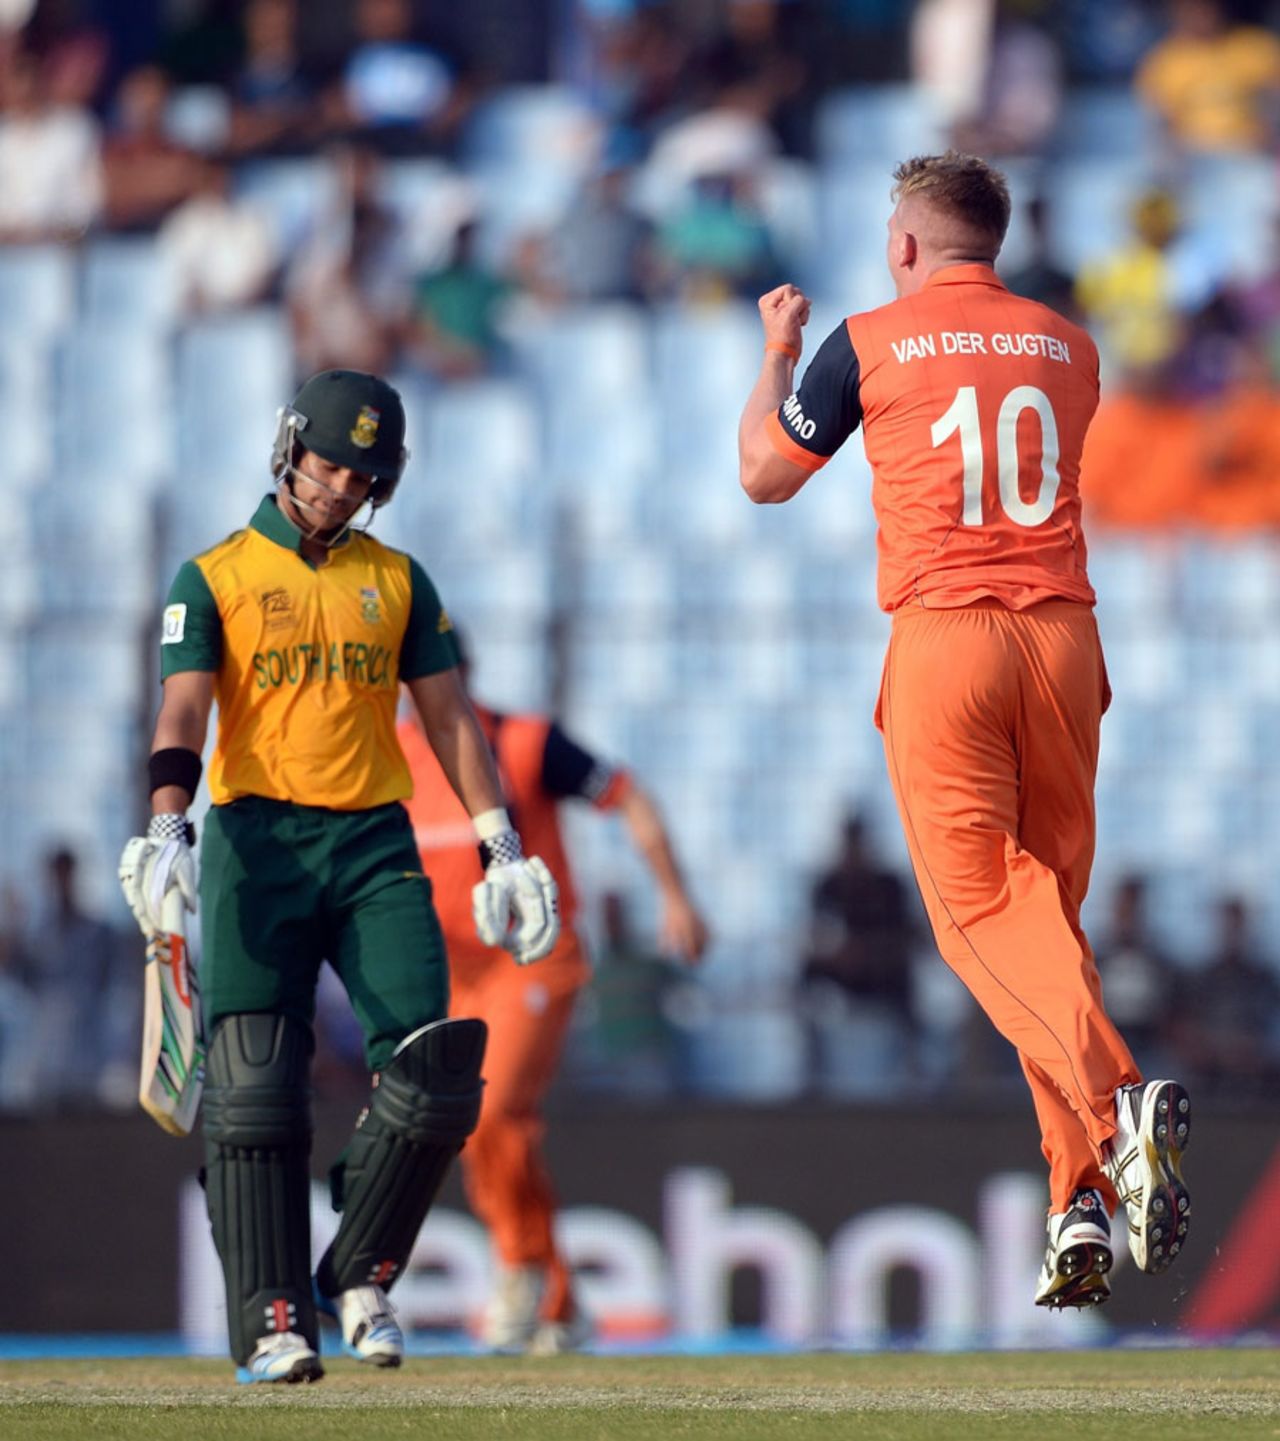 Timm van der Gugten celebrates after getting JP Duminy out, Netherlands v South Africa, World T20, Group 1, Chittagong, March 27, 2014